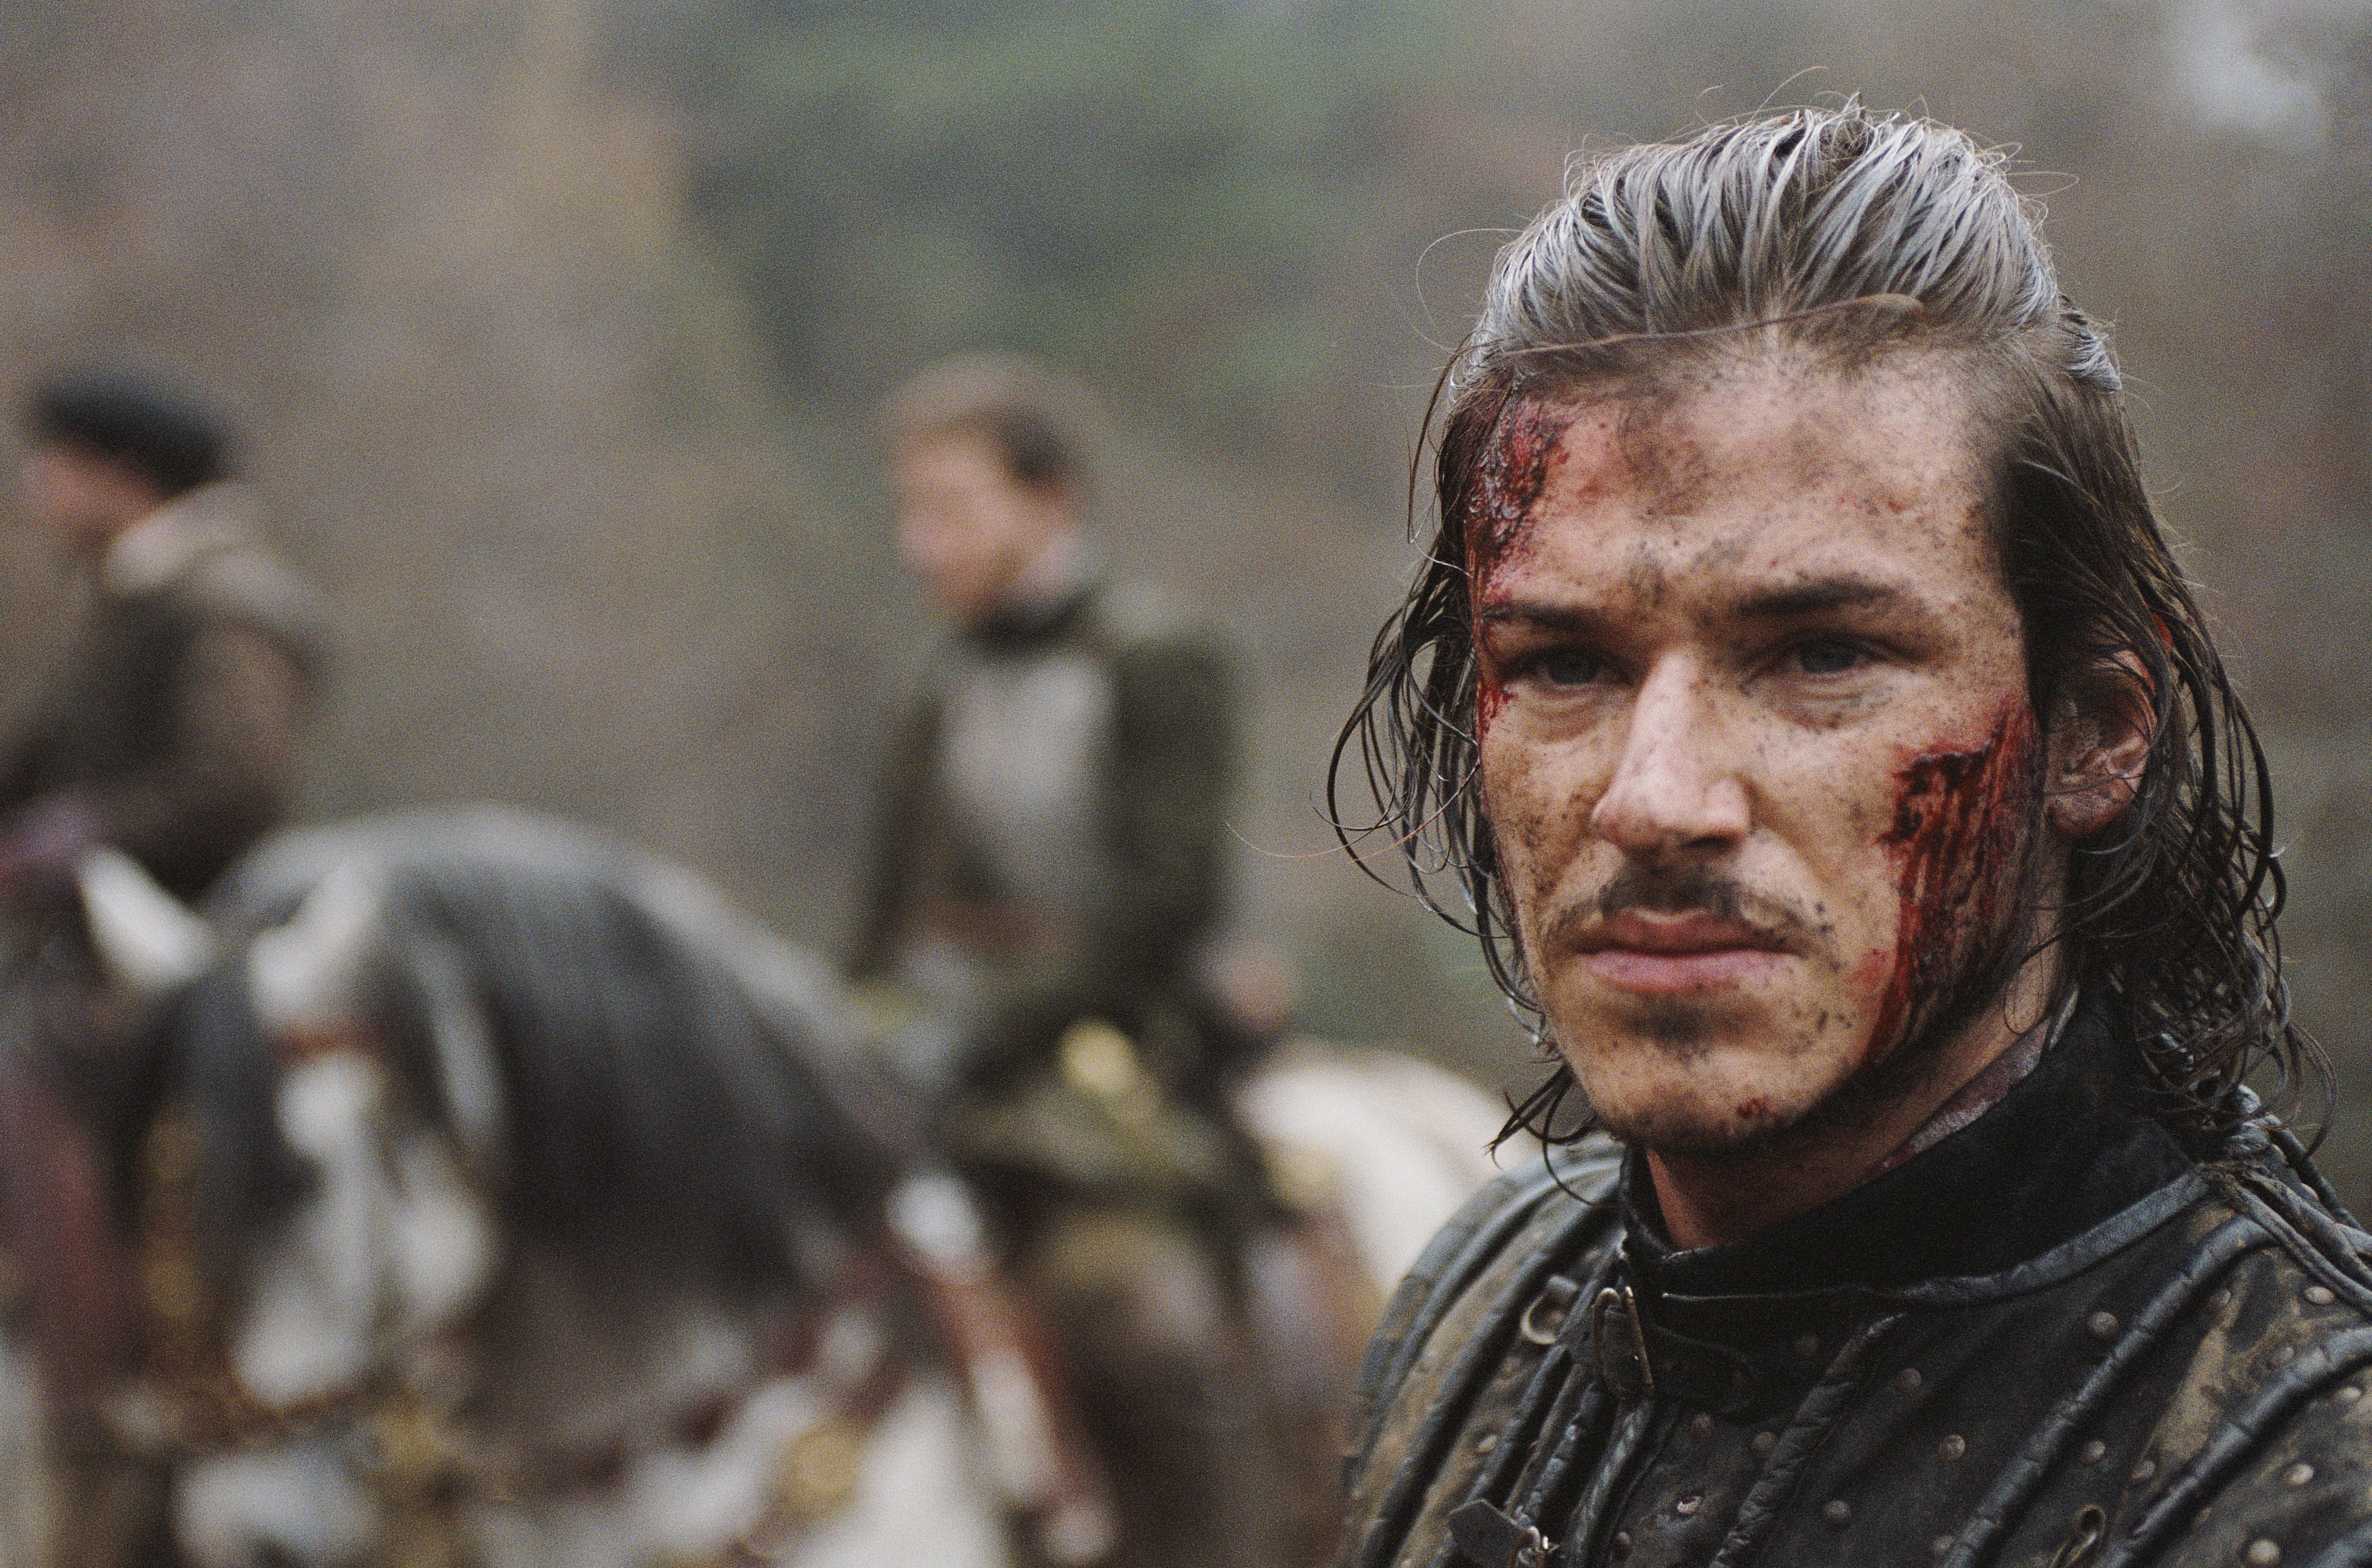 Gaspard Ulliel takes us inside the historical drama The Princess of Montpensier